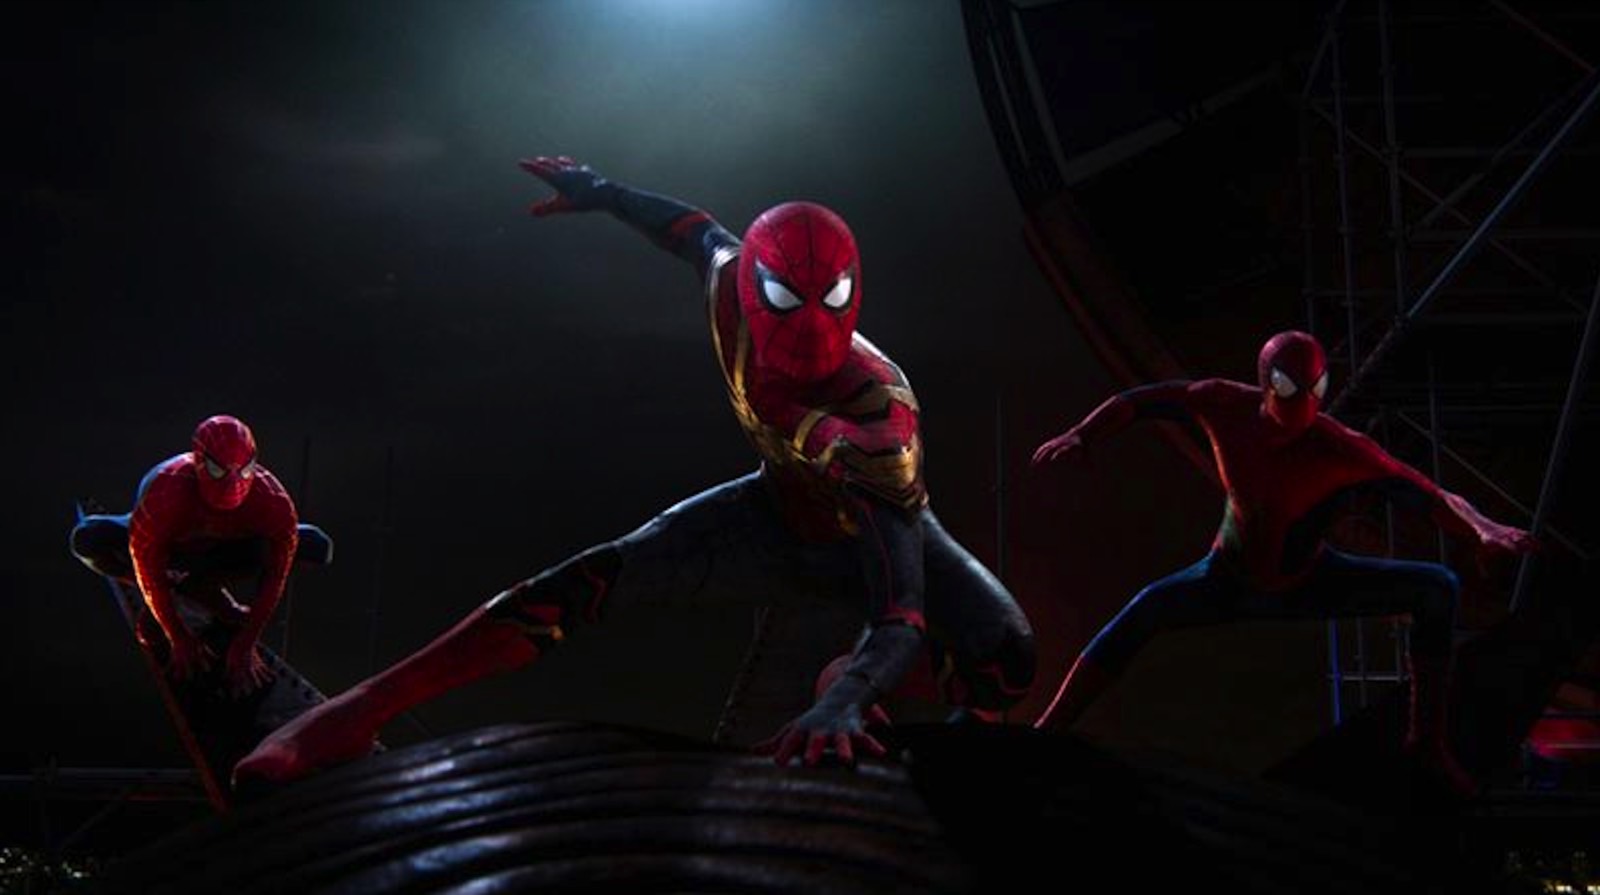 How to watch Spider-Man No Way Home online right now